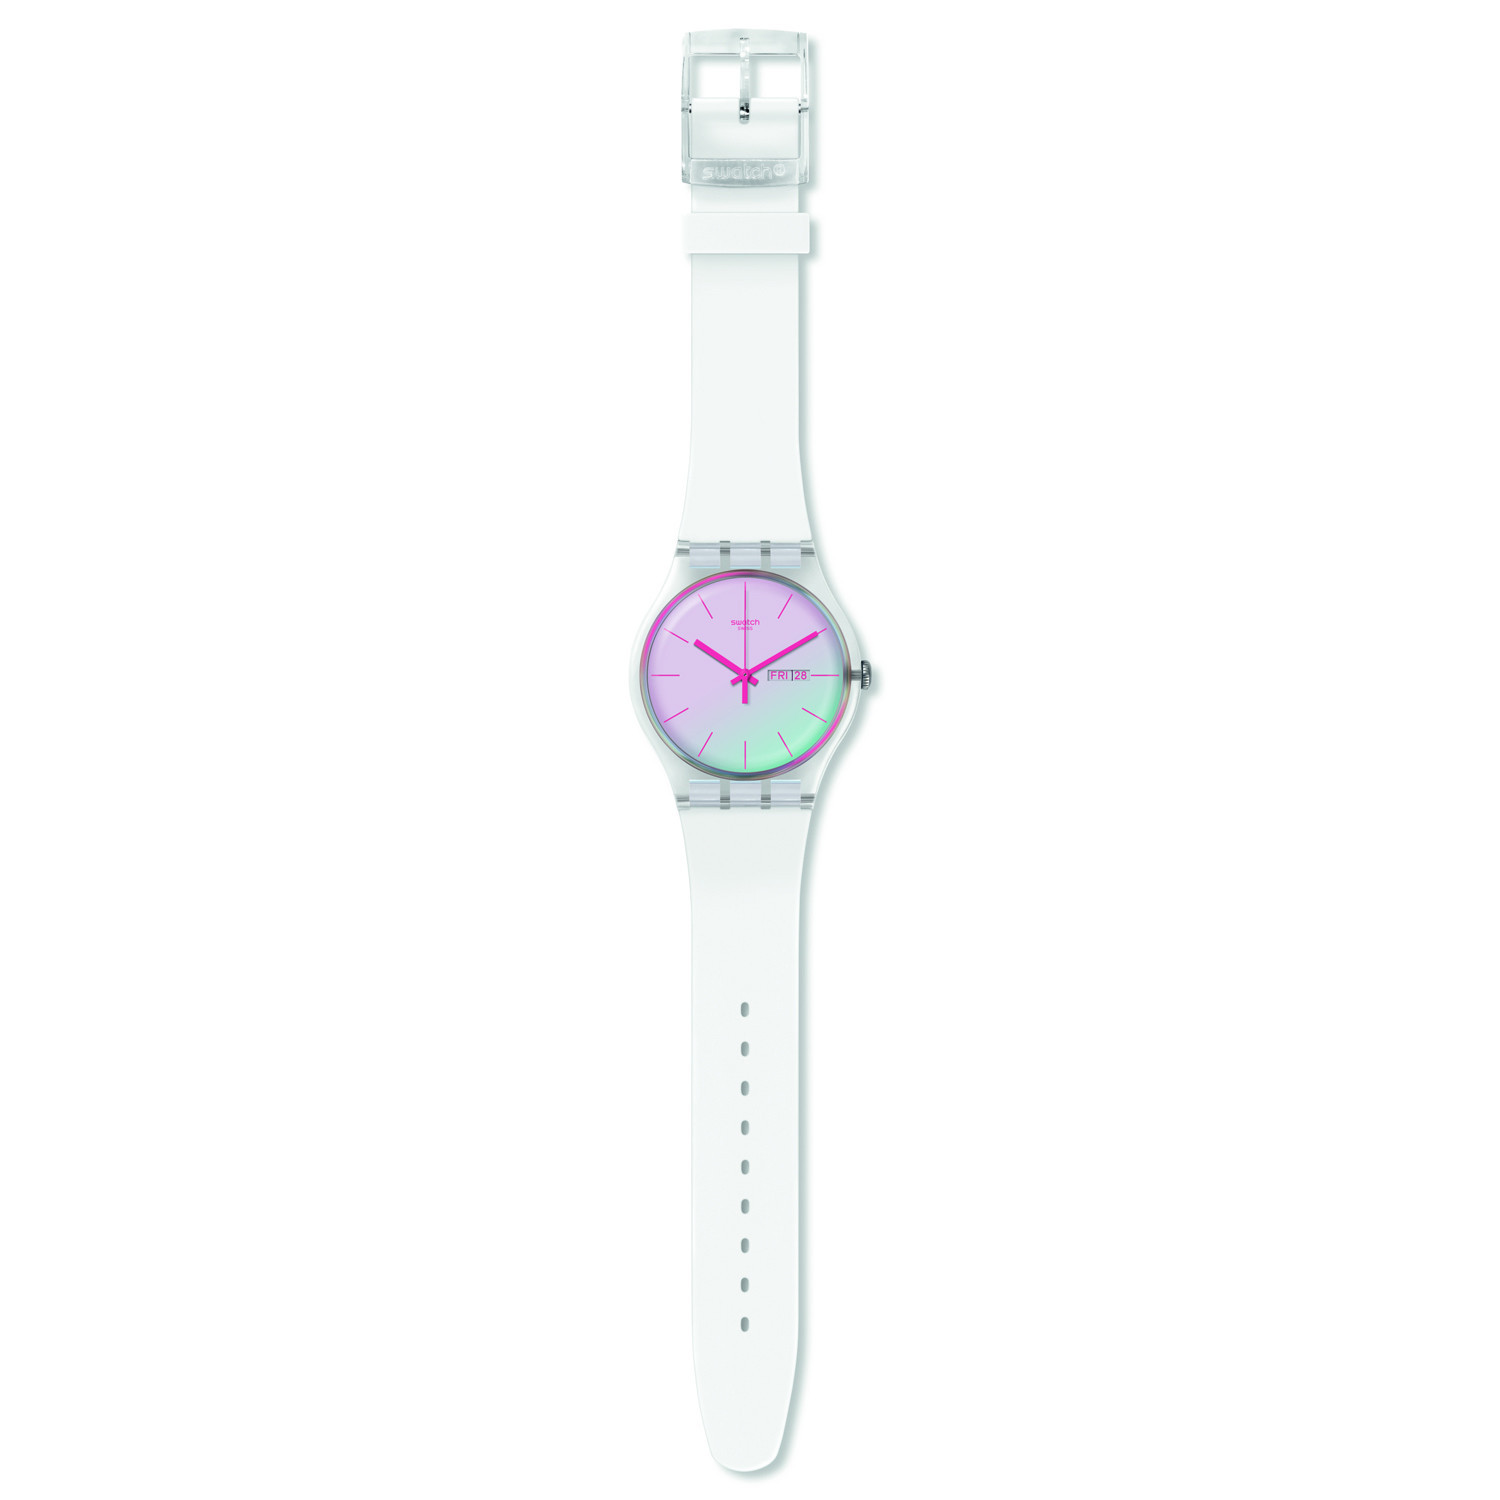 Montre femme Swatch Polawhite
collection Transformation